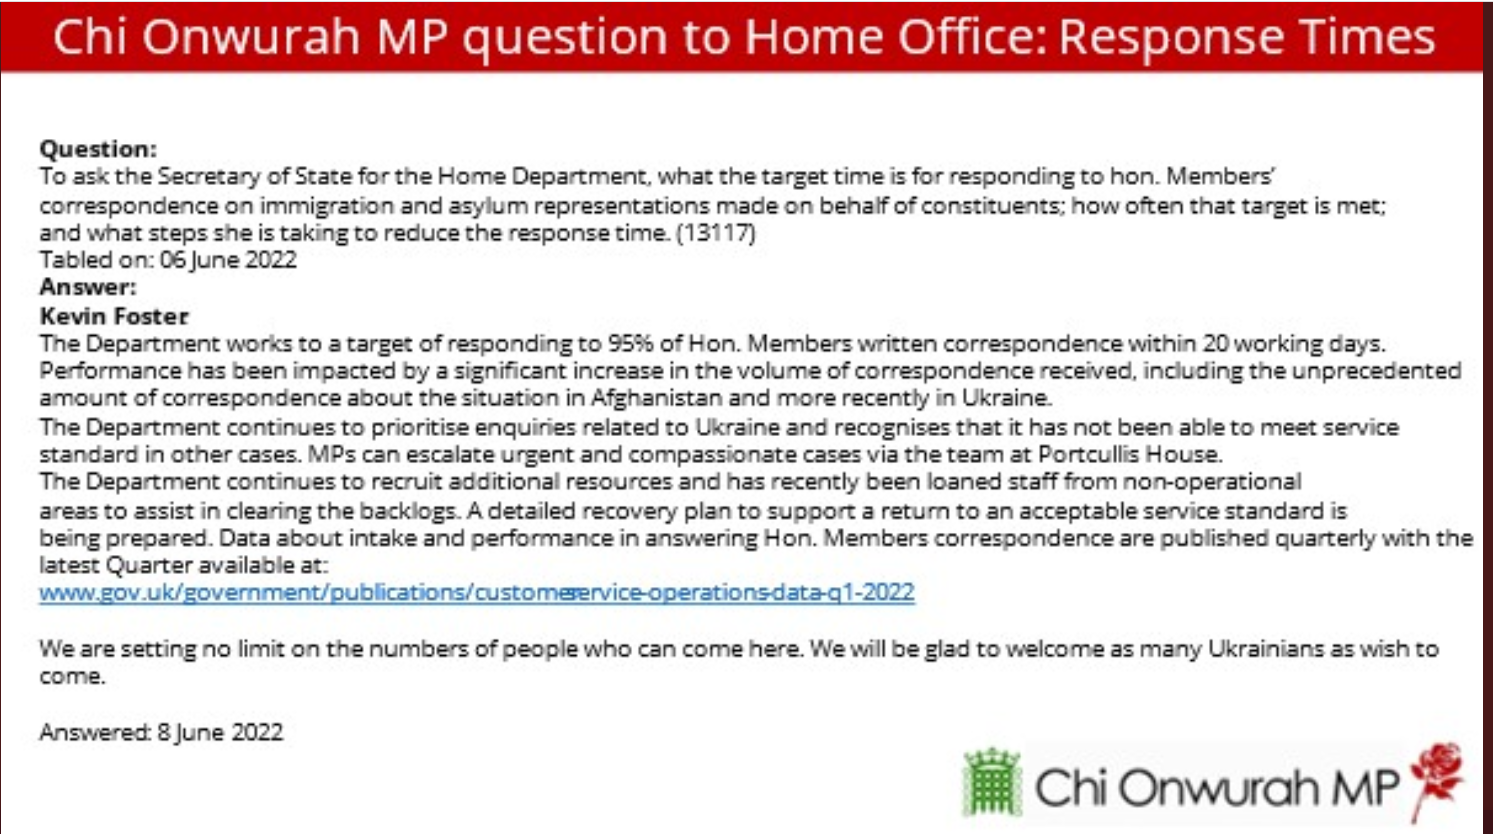 Home Office failing as17,000 emails wait for a response for MP’s constituents.